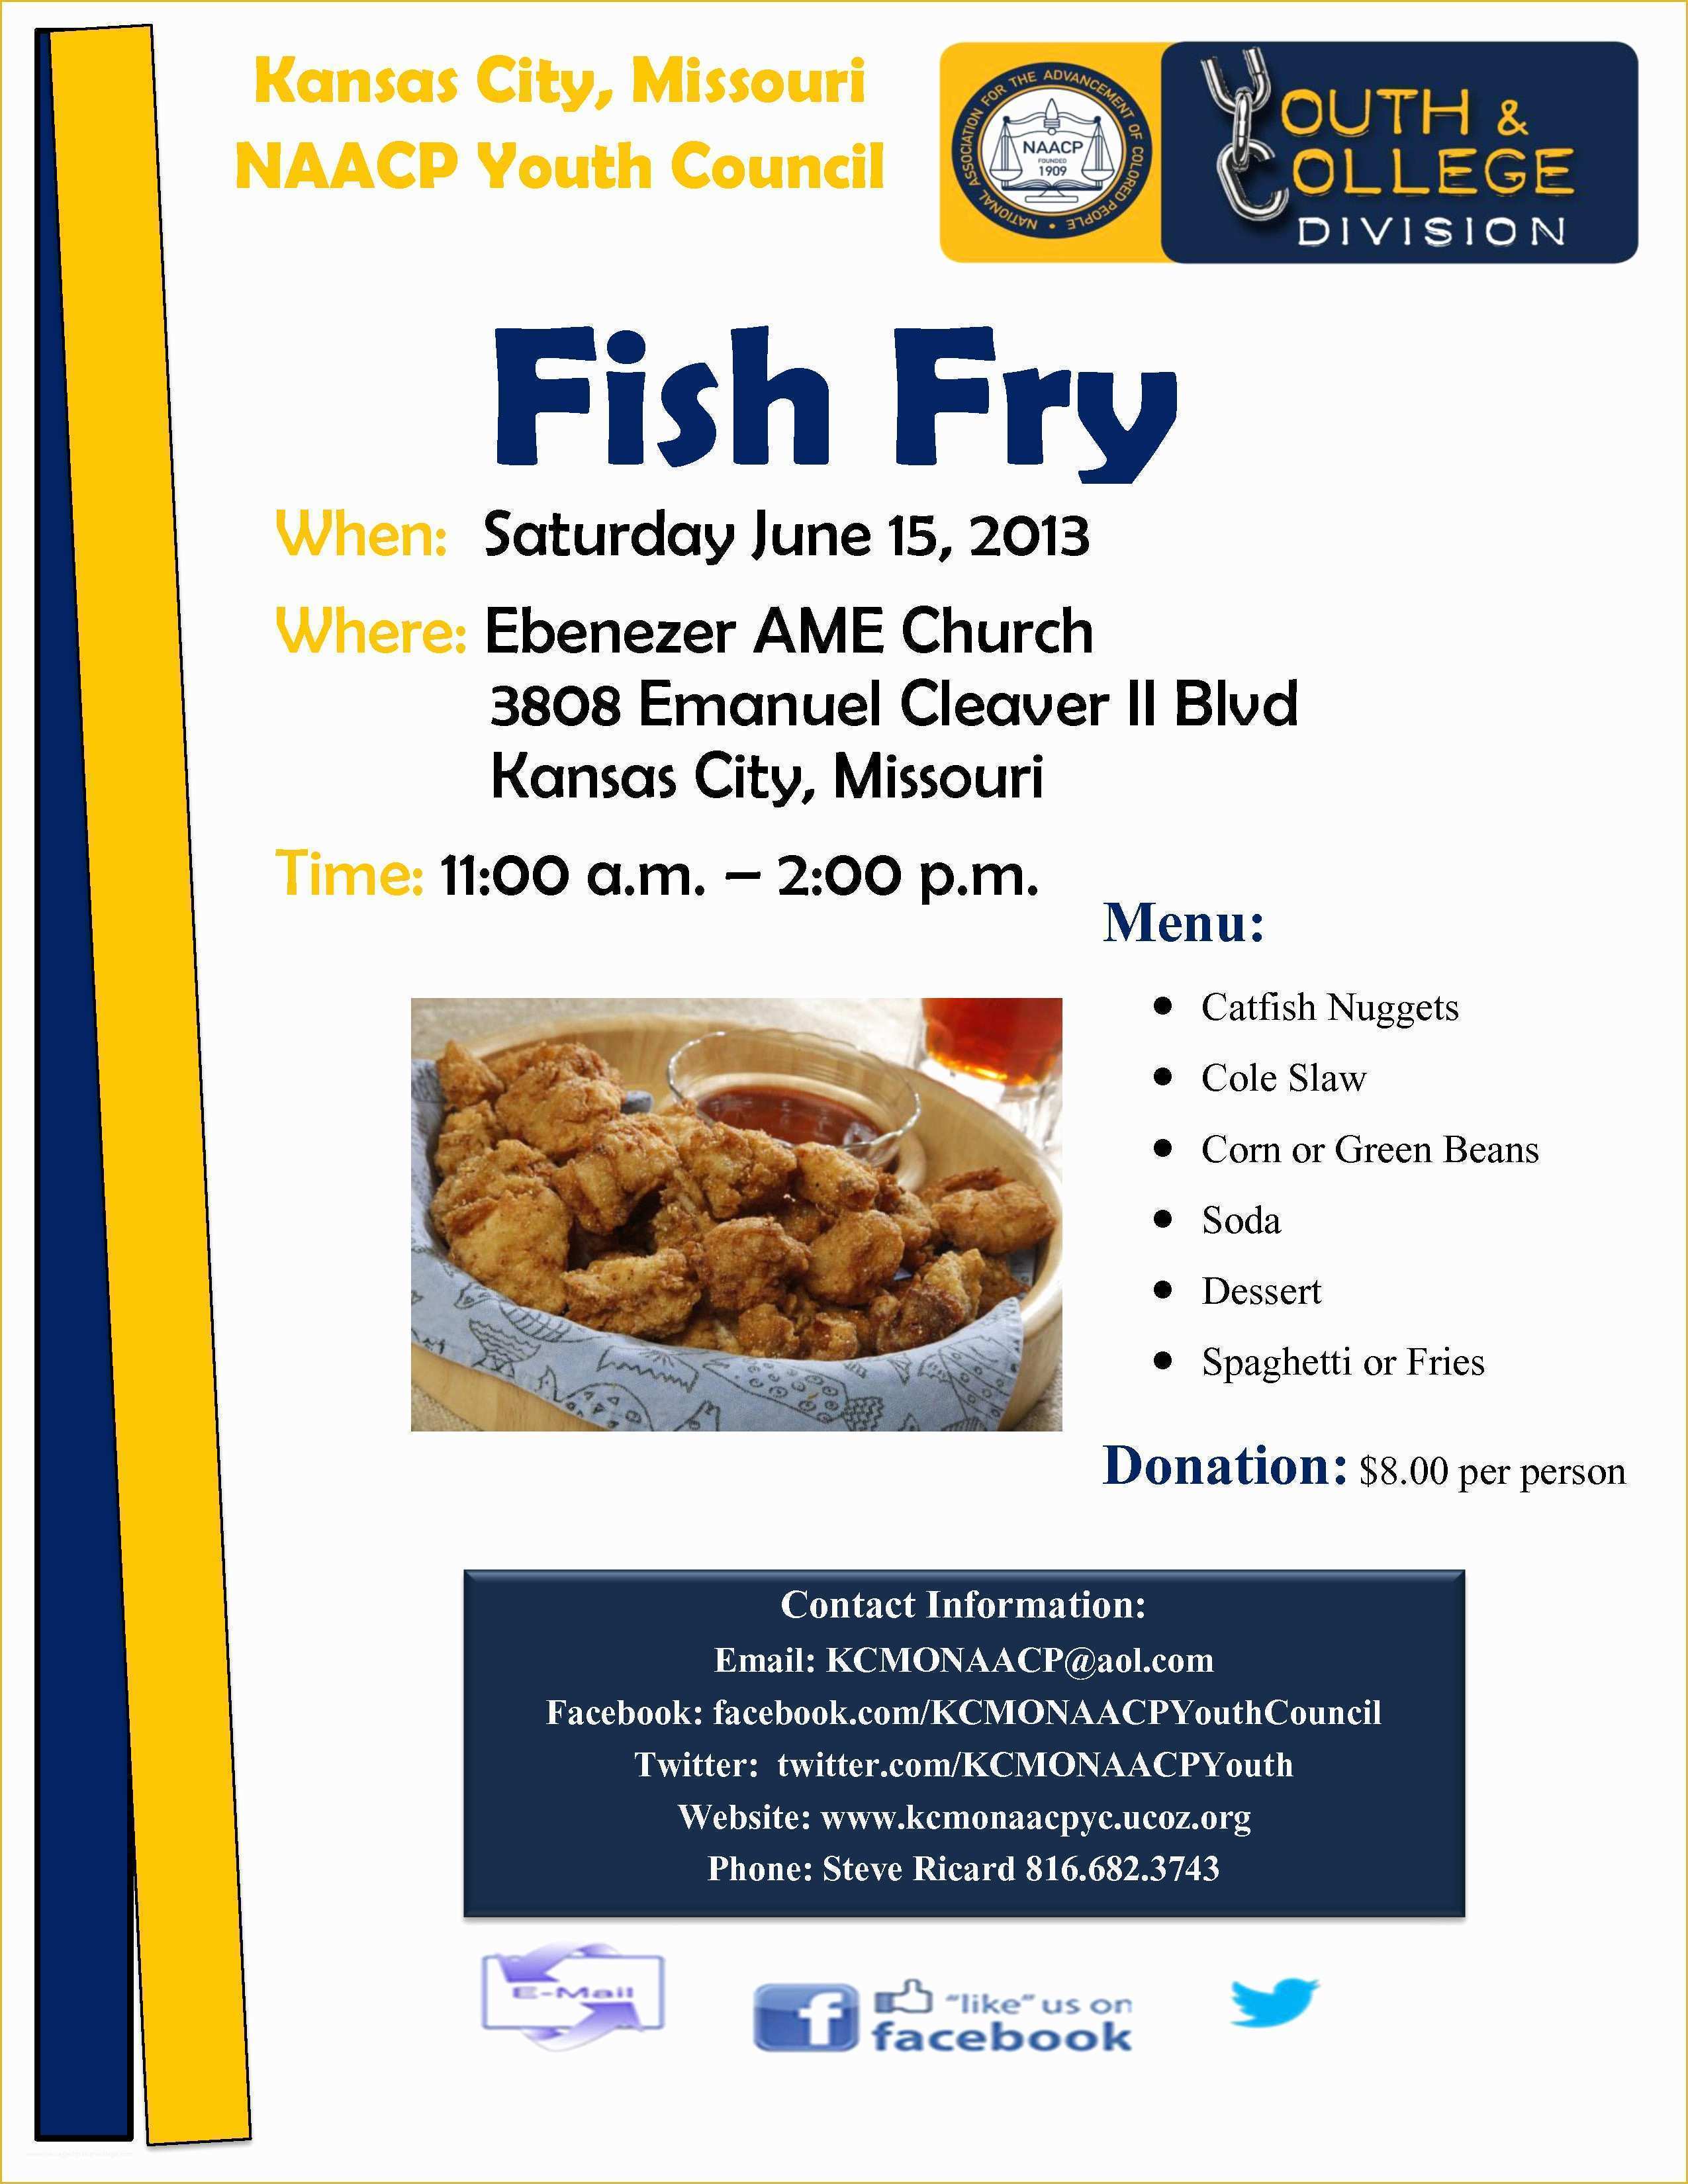 Free Fish Fry Flyer Template Of Kcmo Naacp Youth Council Fish Fry with Fish Fry Clipart